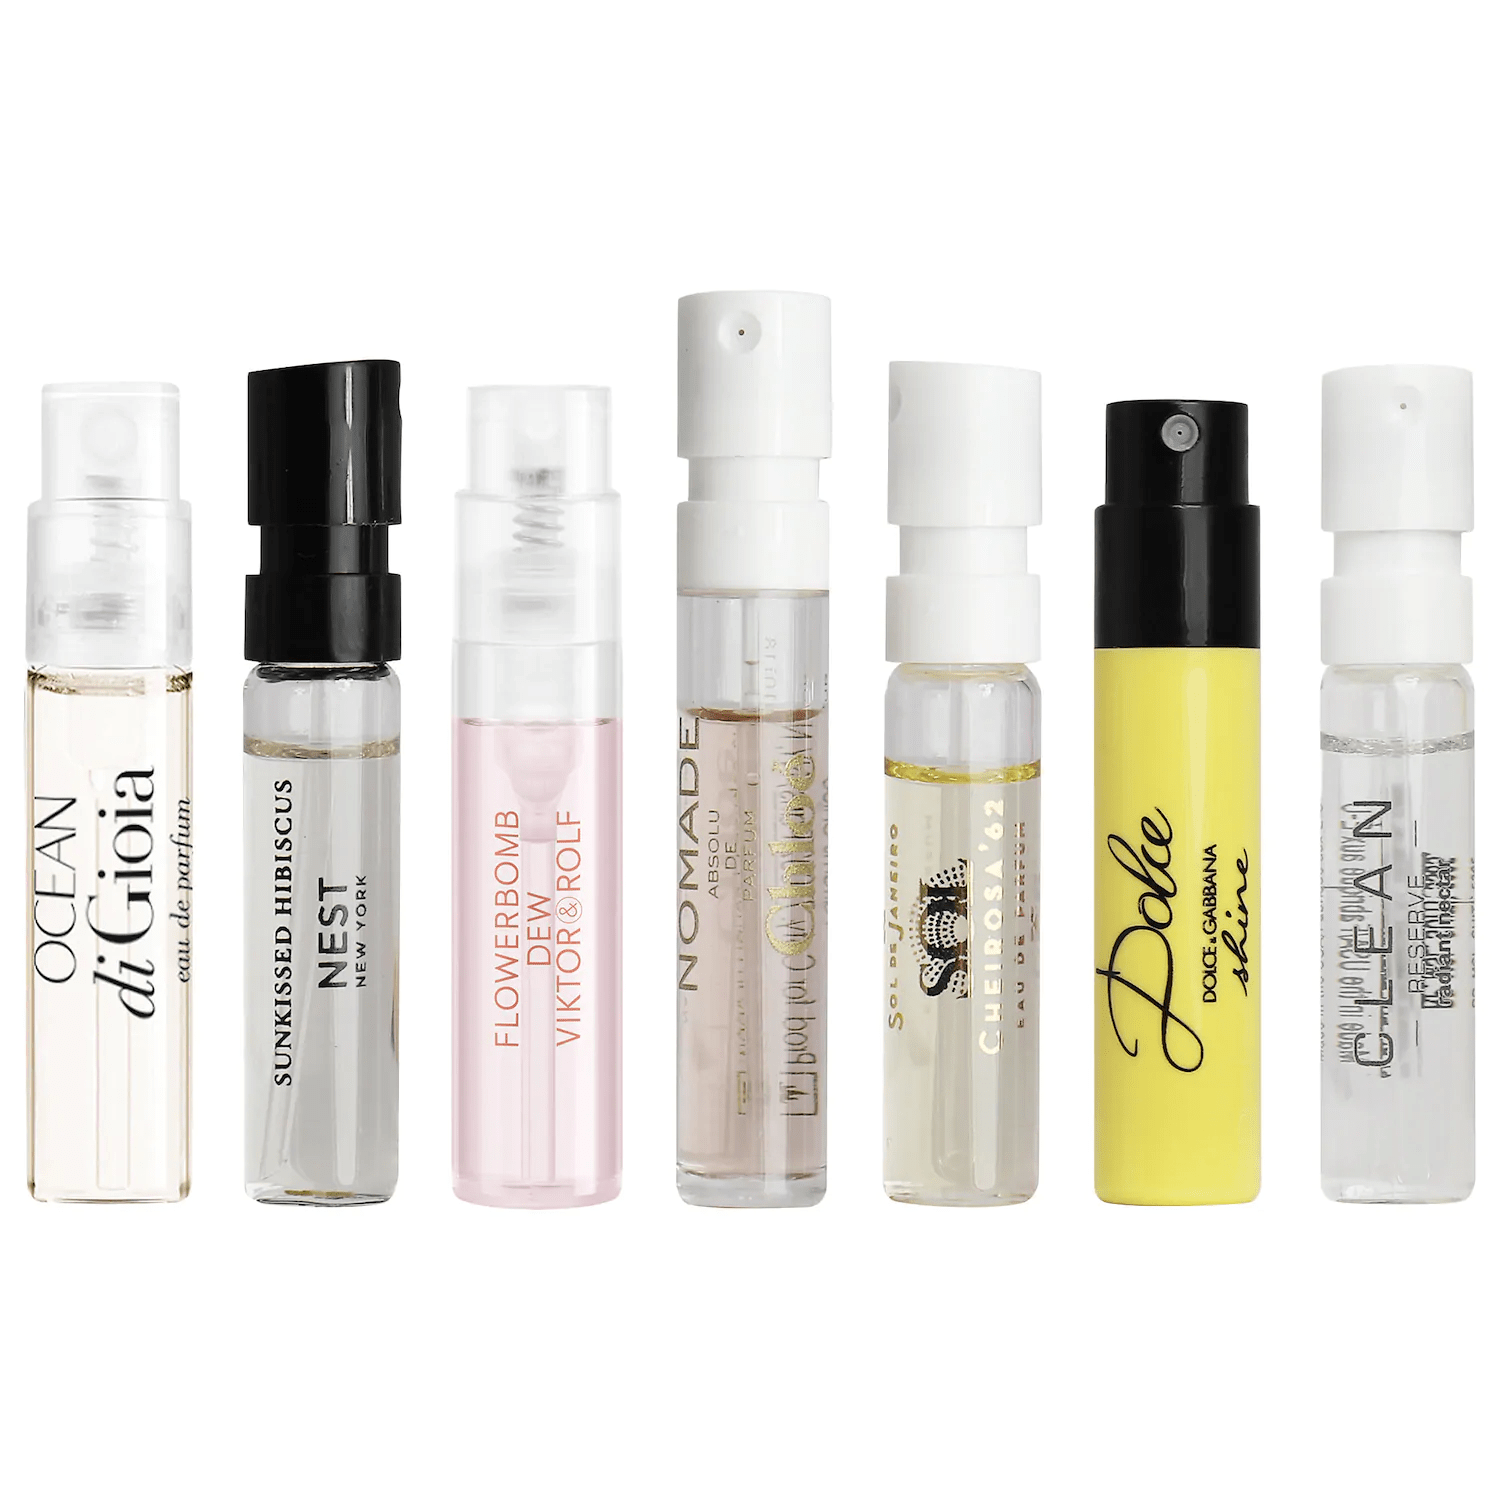 Sephora Favorites Clean Perfume Sampler Set - Available Now